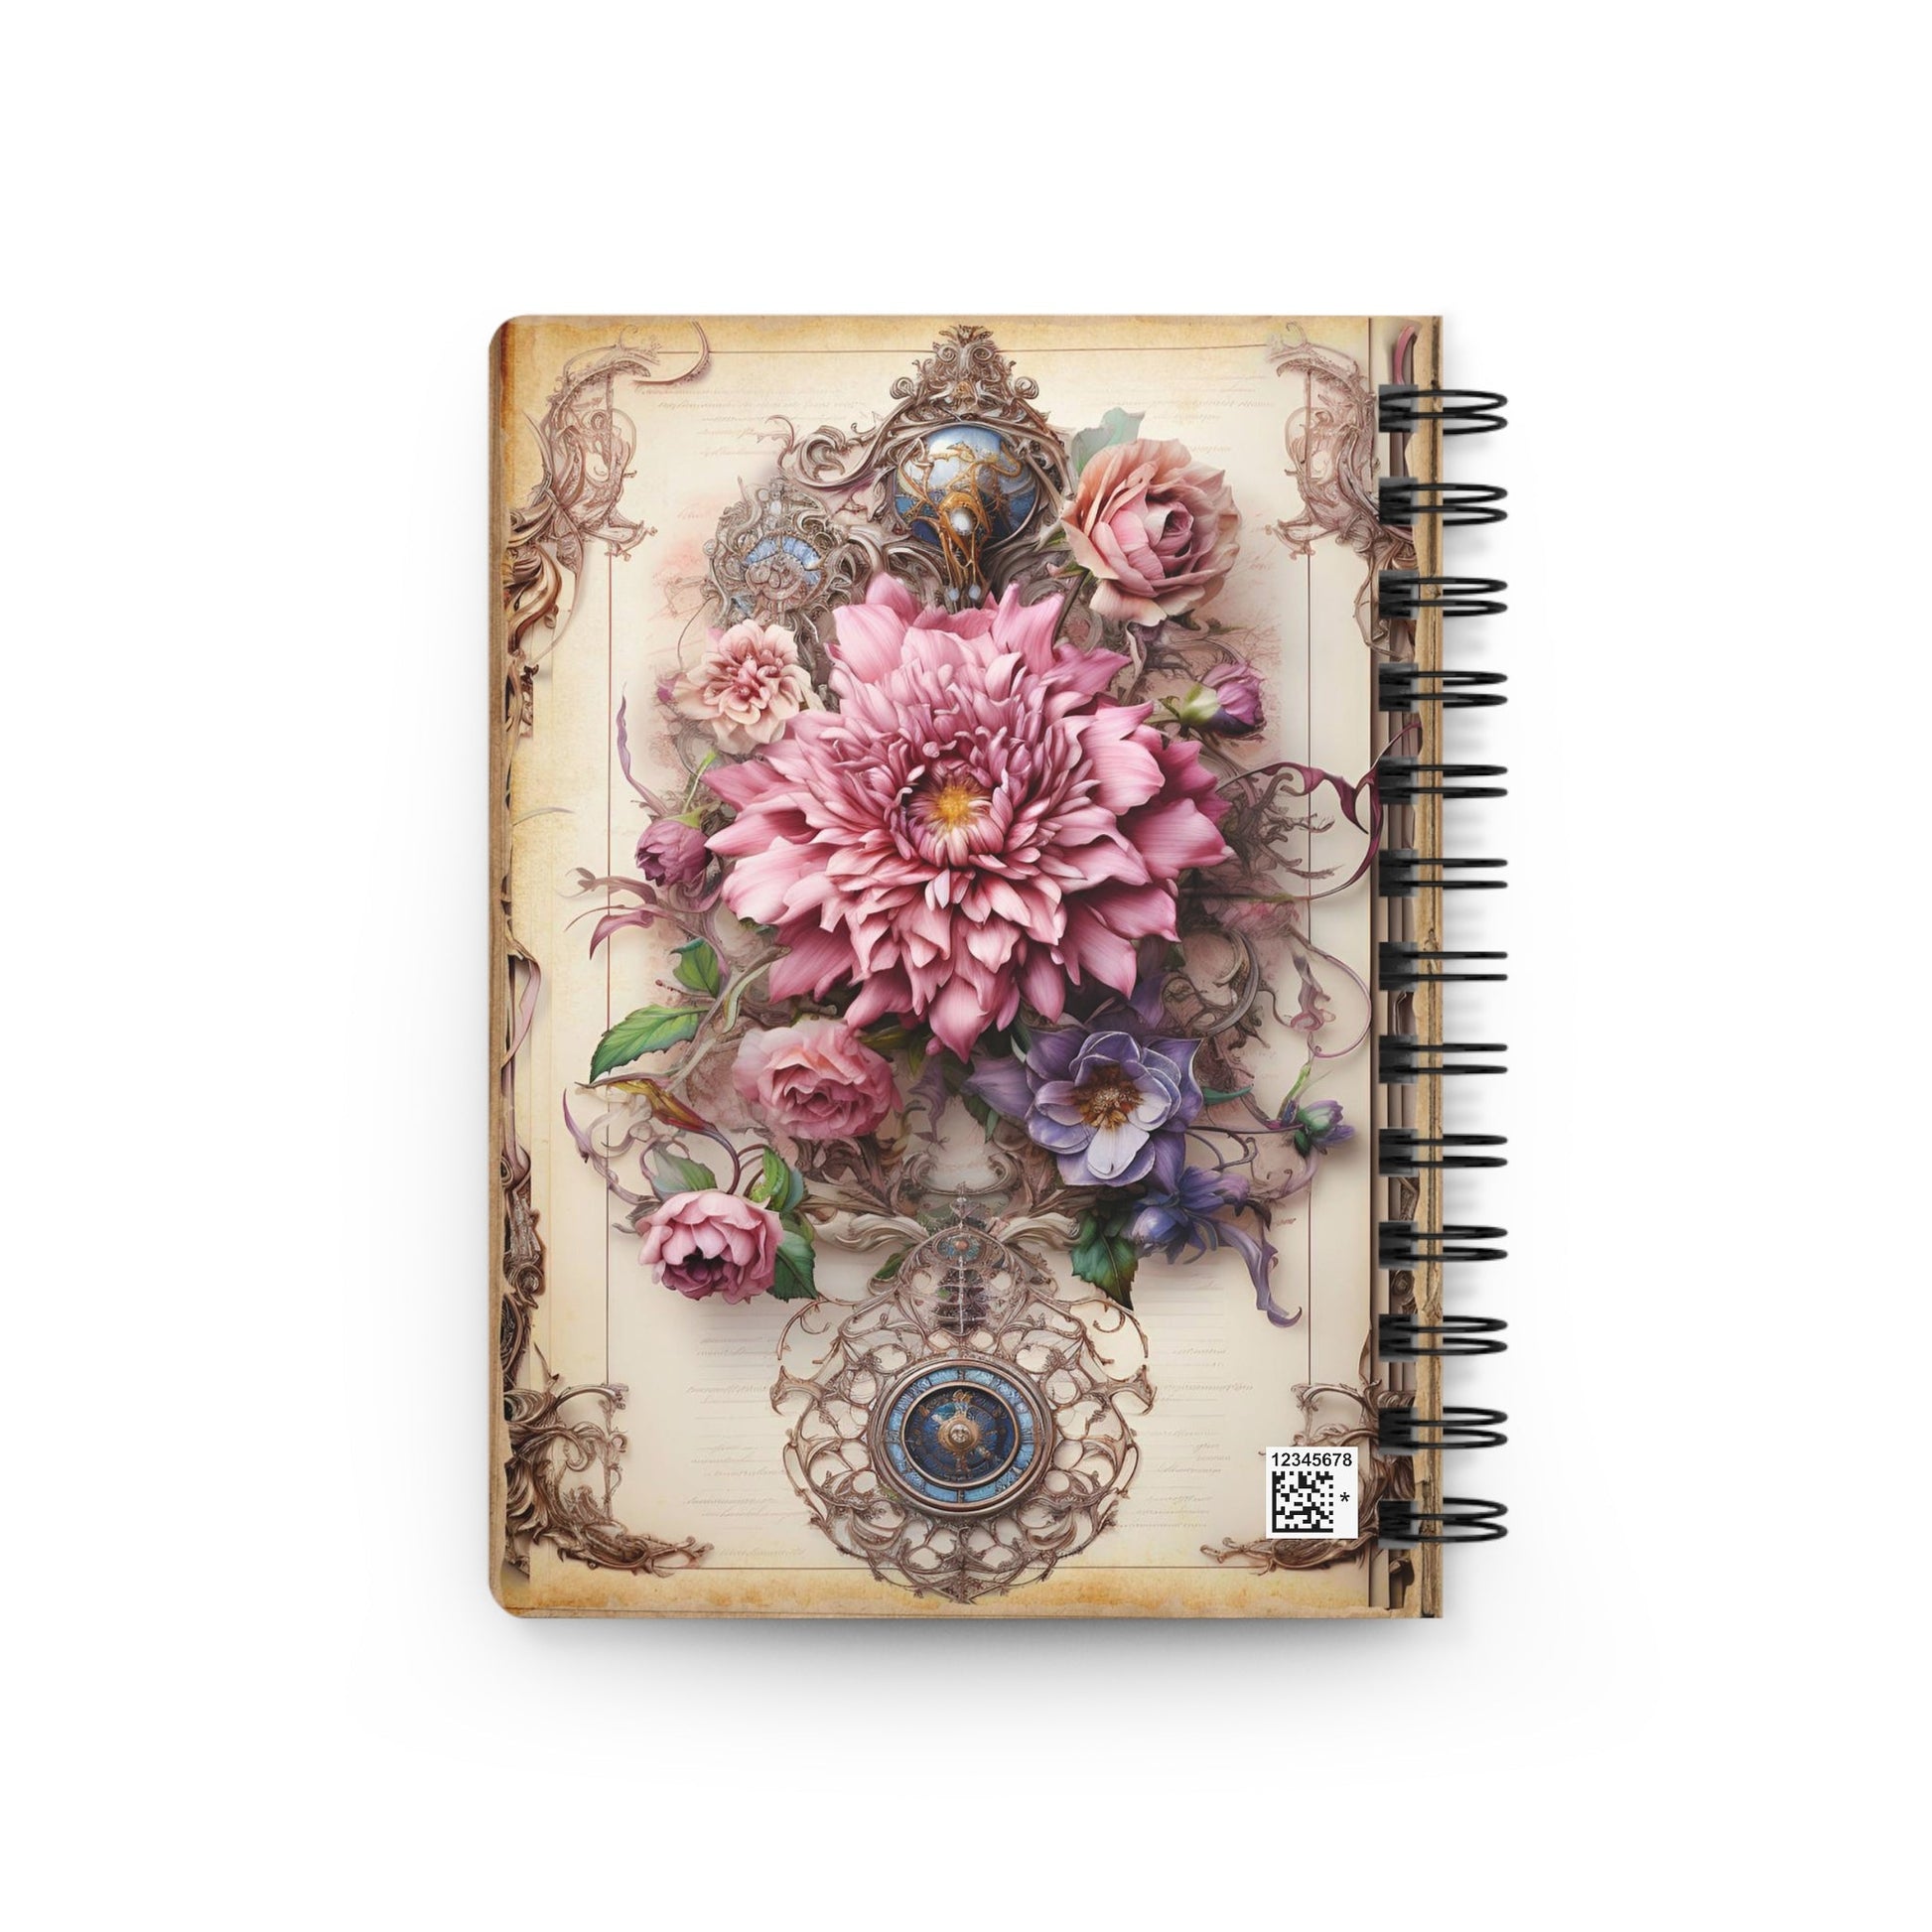 CrazyYetiClothing, CYC, Virgo - Floral Collection (Spiral Bound Journal), Paper products